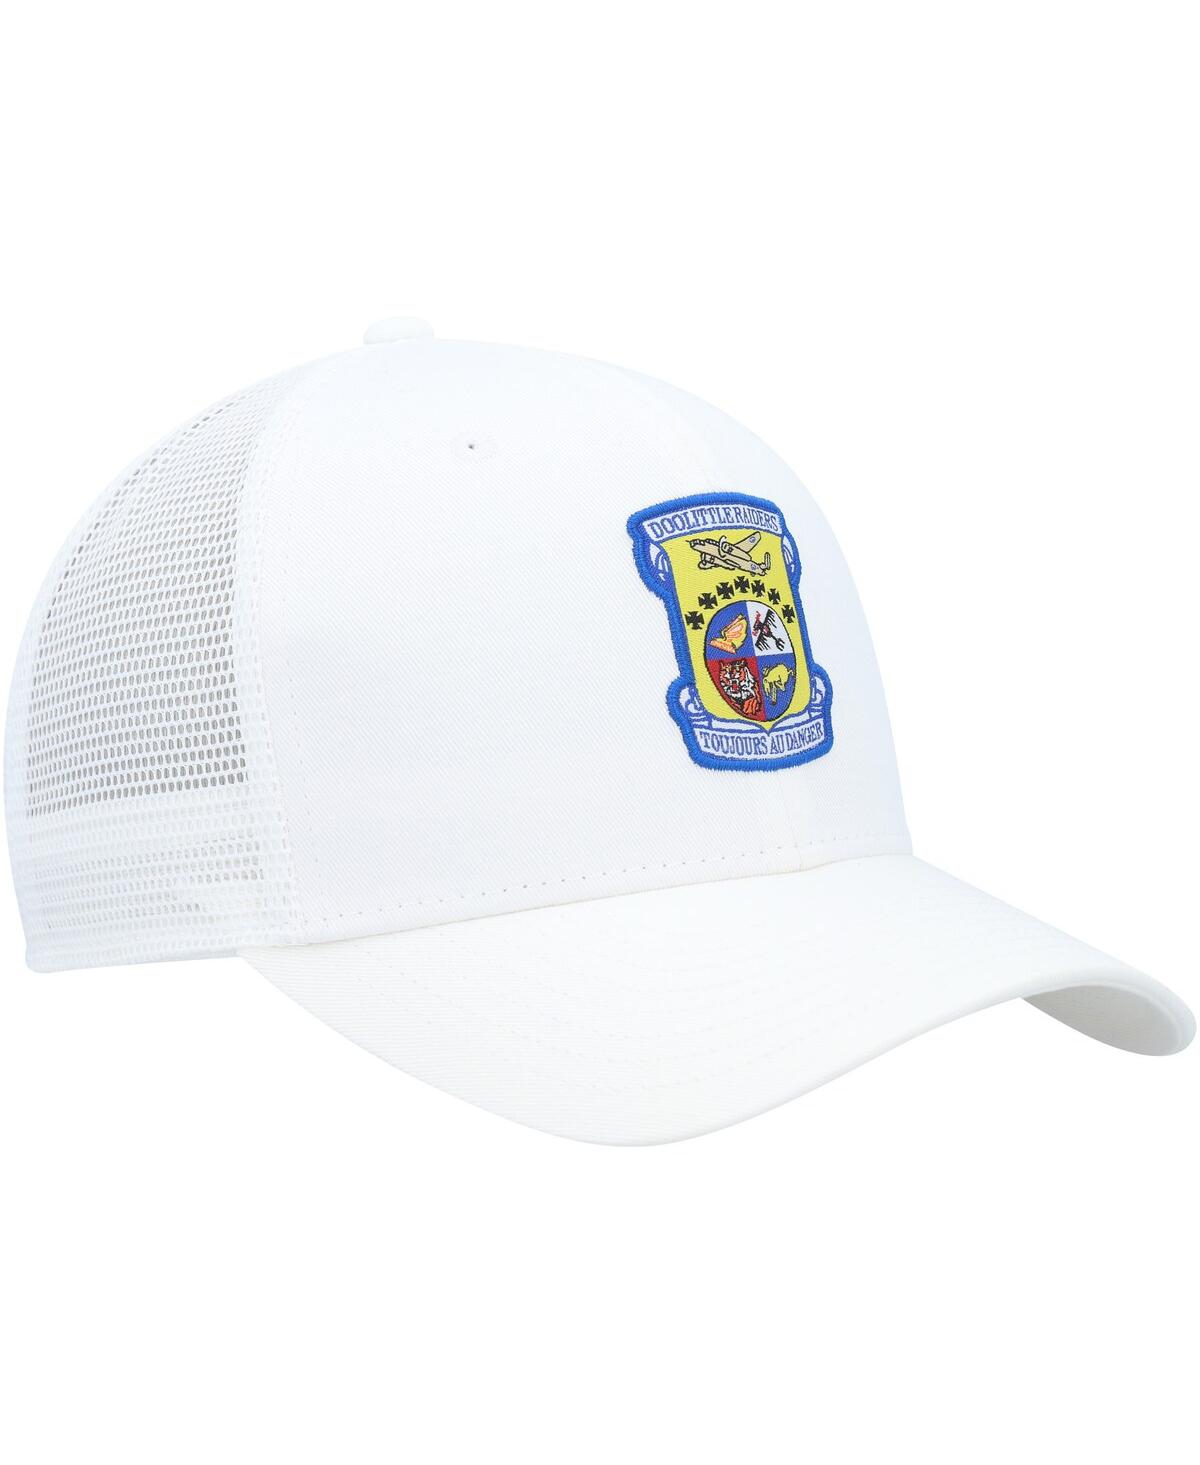 Shop Nike Men's  White Air Force Falcons Rivalry Classic99 Trucker Adjustable Hat